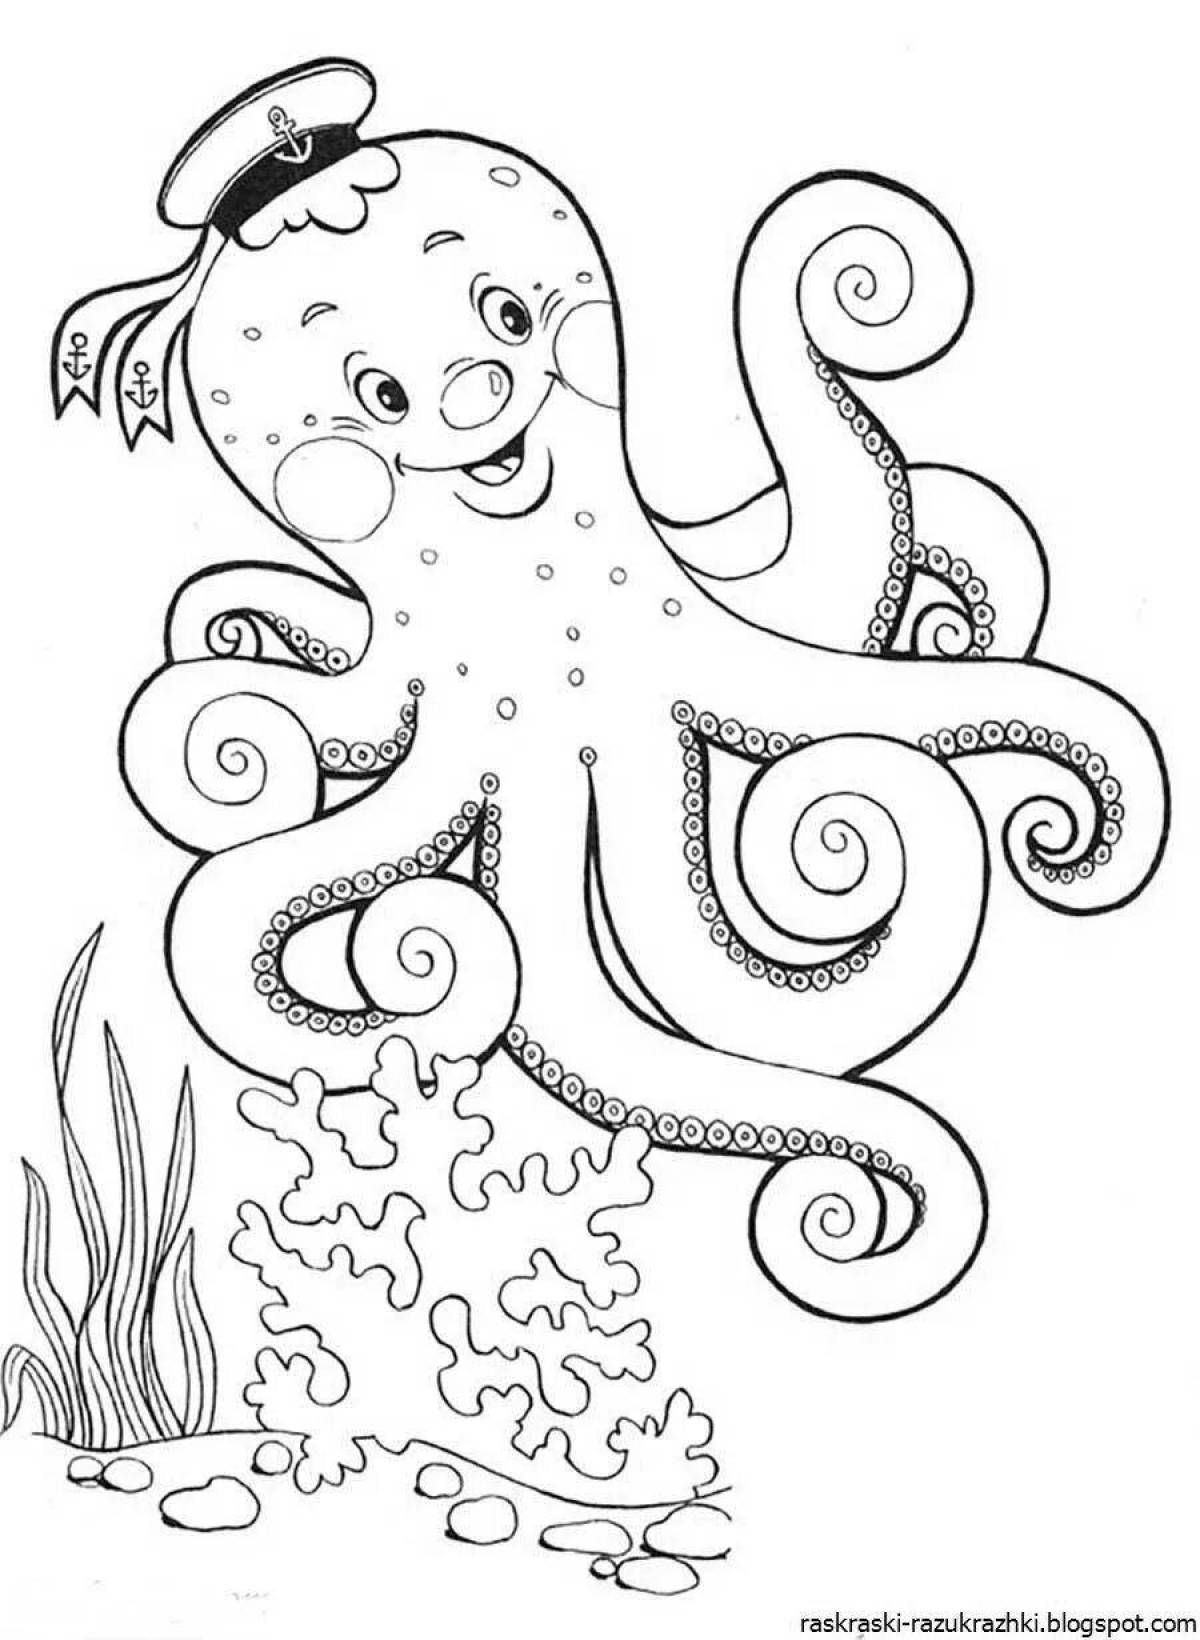 Coloring pages of marine life